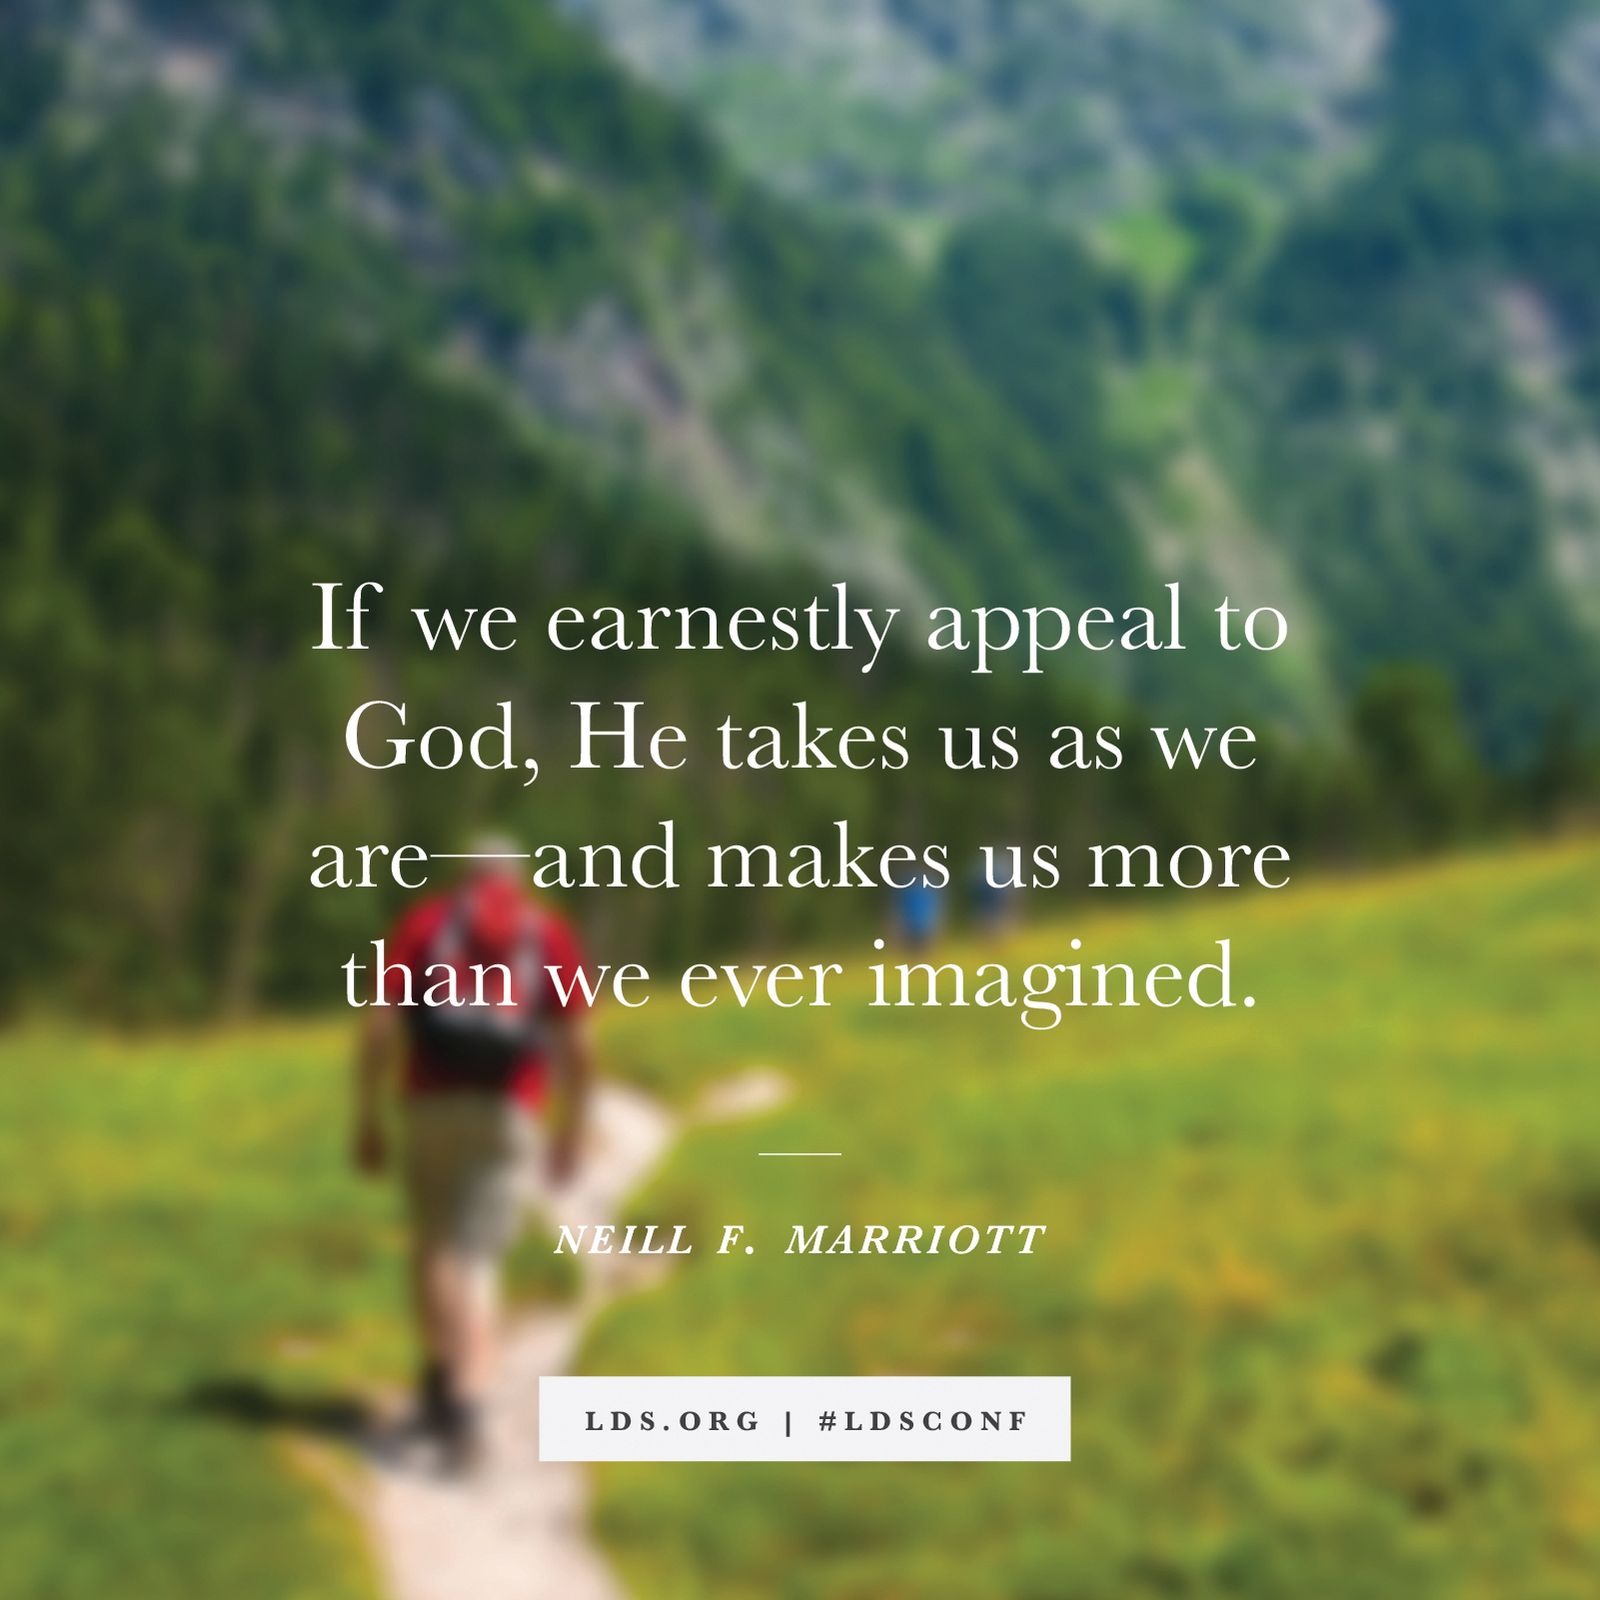 “If we earnestly appeal to God, He takes us as we are—and makes us more than we ever imagined.” —Neill F. Marriott, “Yielding Our Hearts to God”